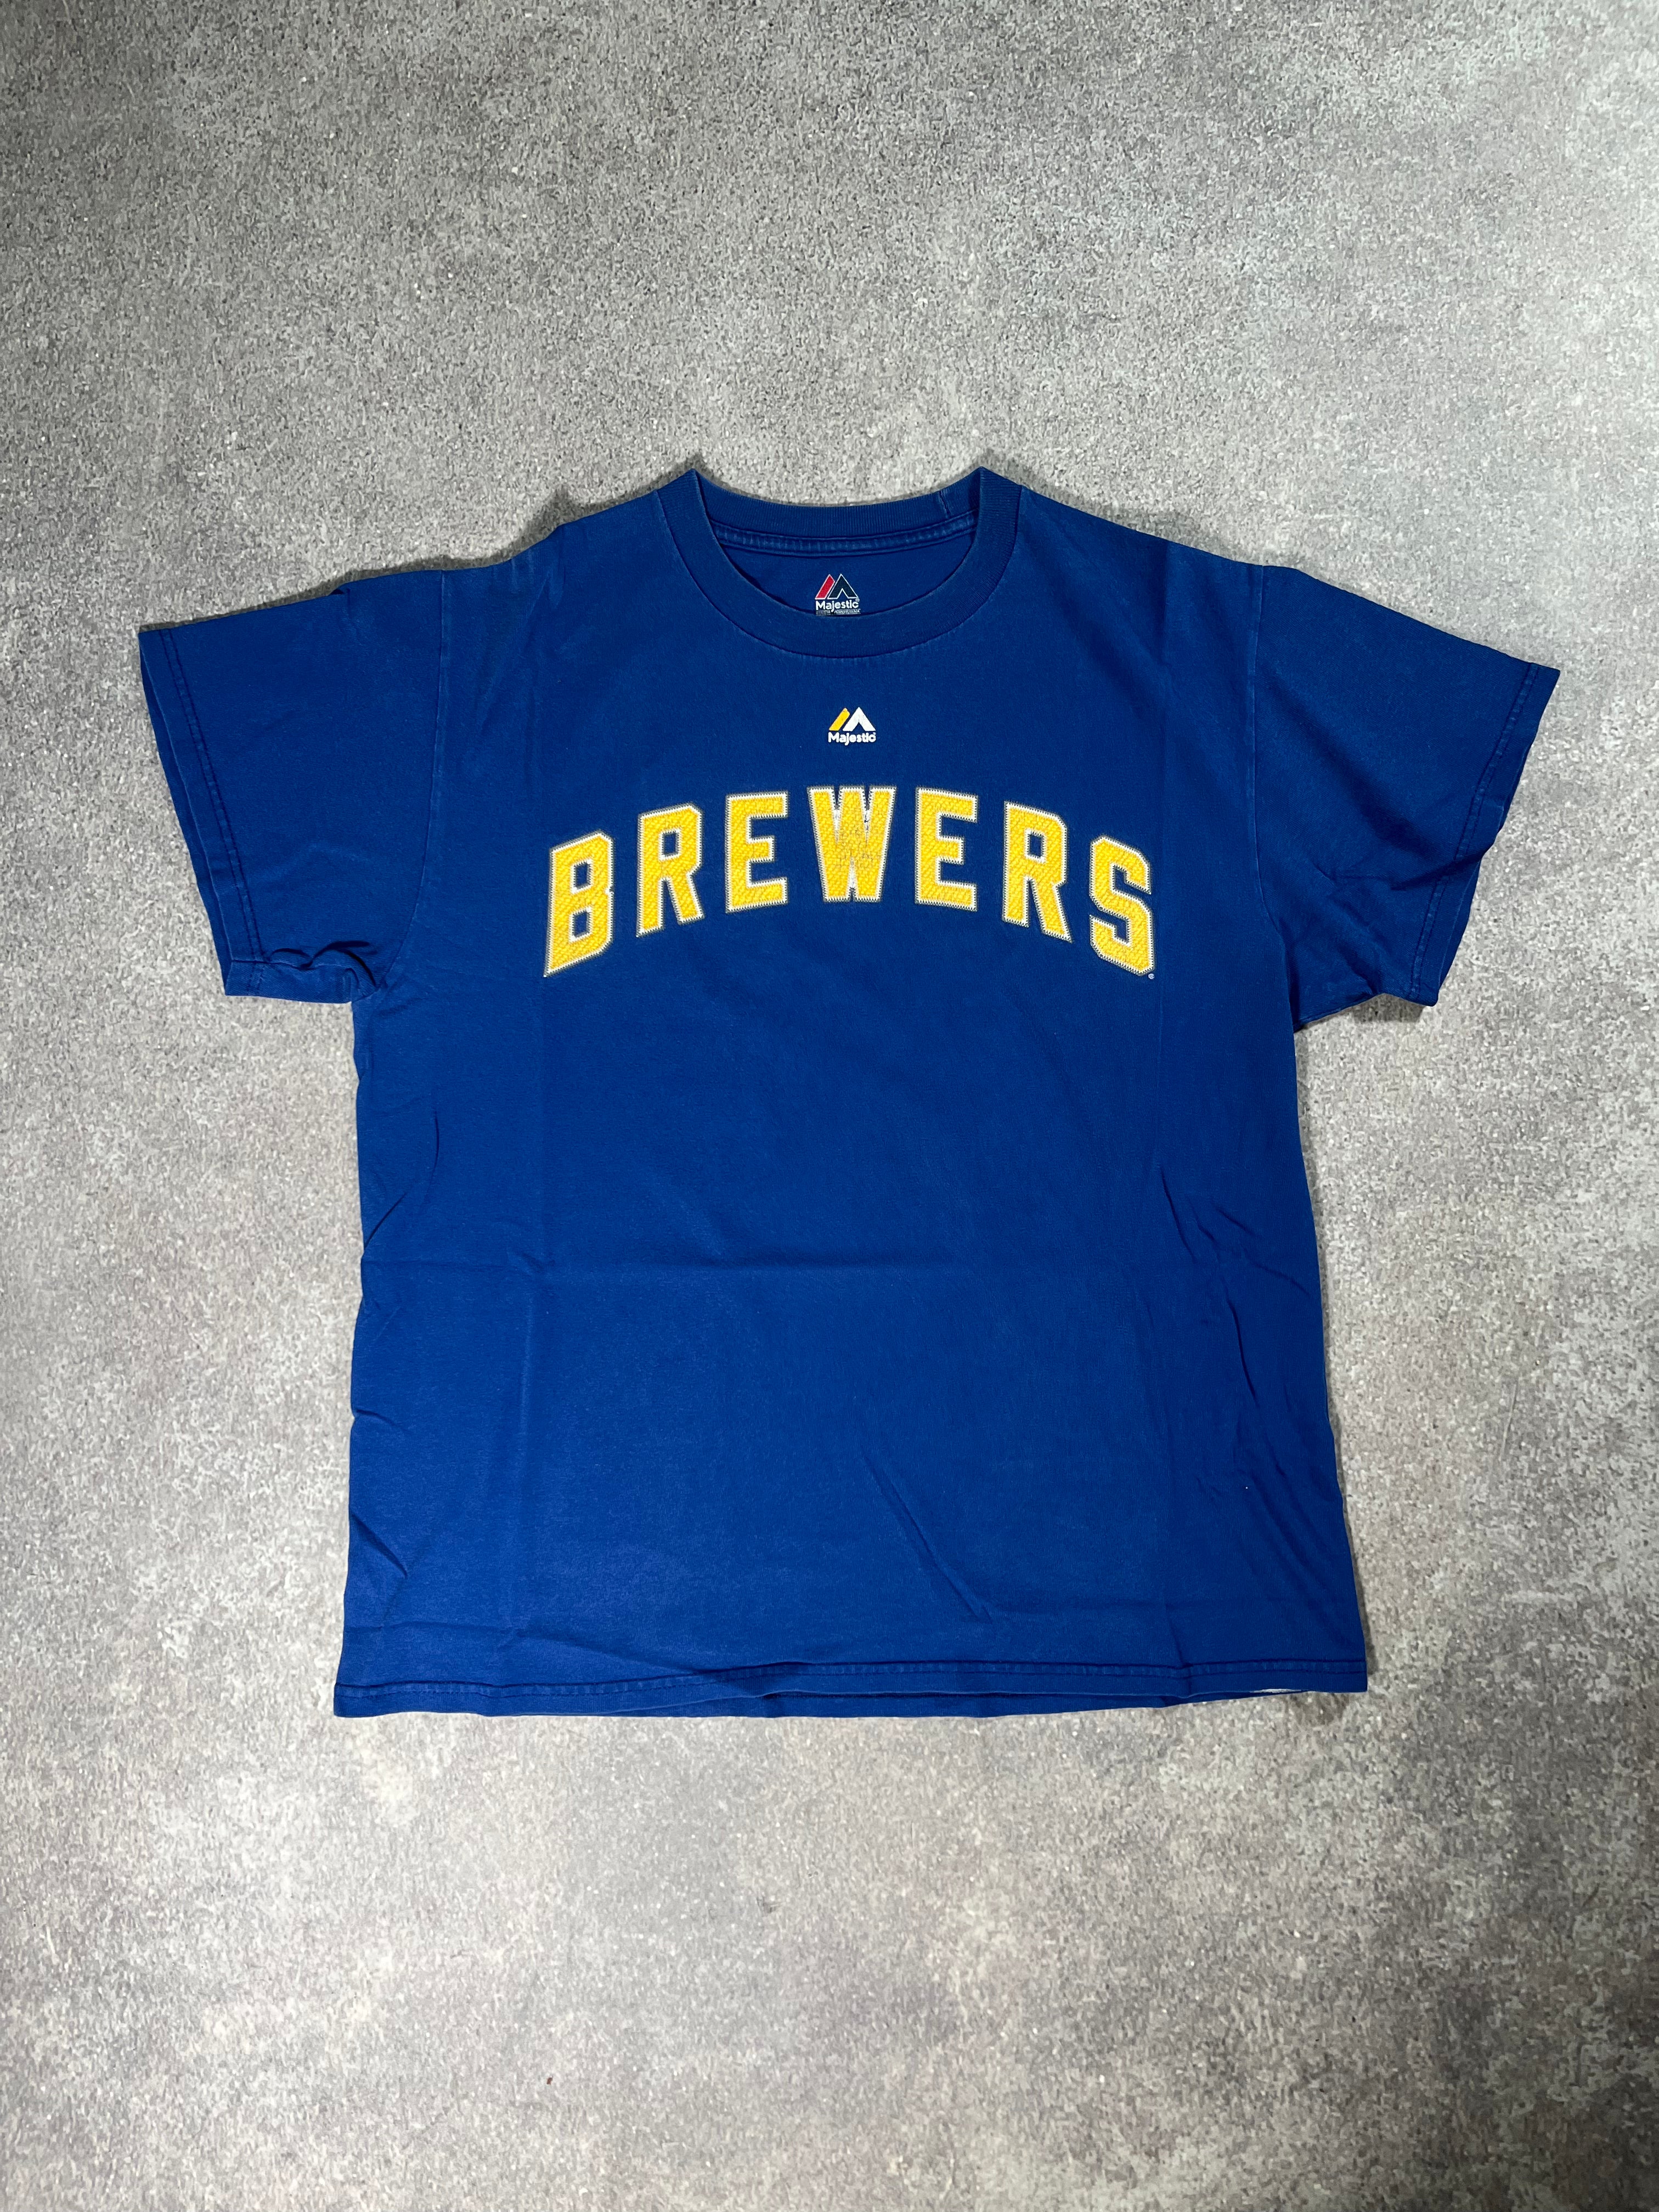 Vintage Majestic Brewers Shirt Blue // X-Small - RHAGHOUSE VINTAGE